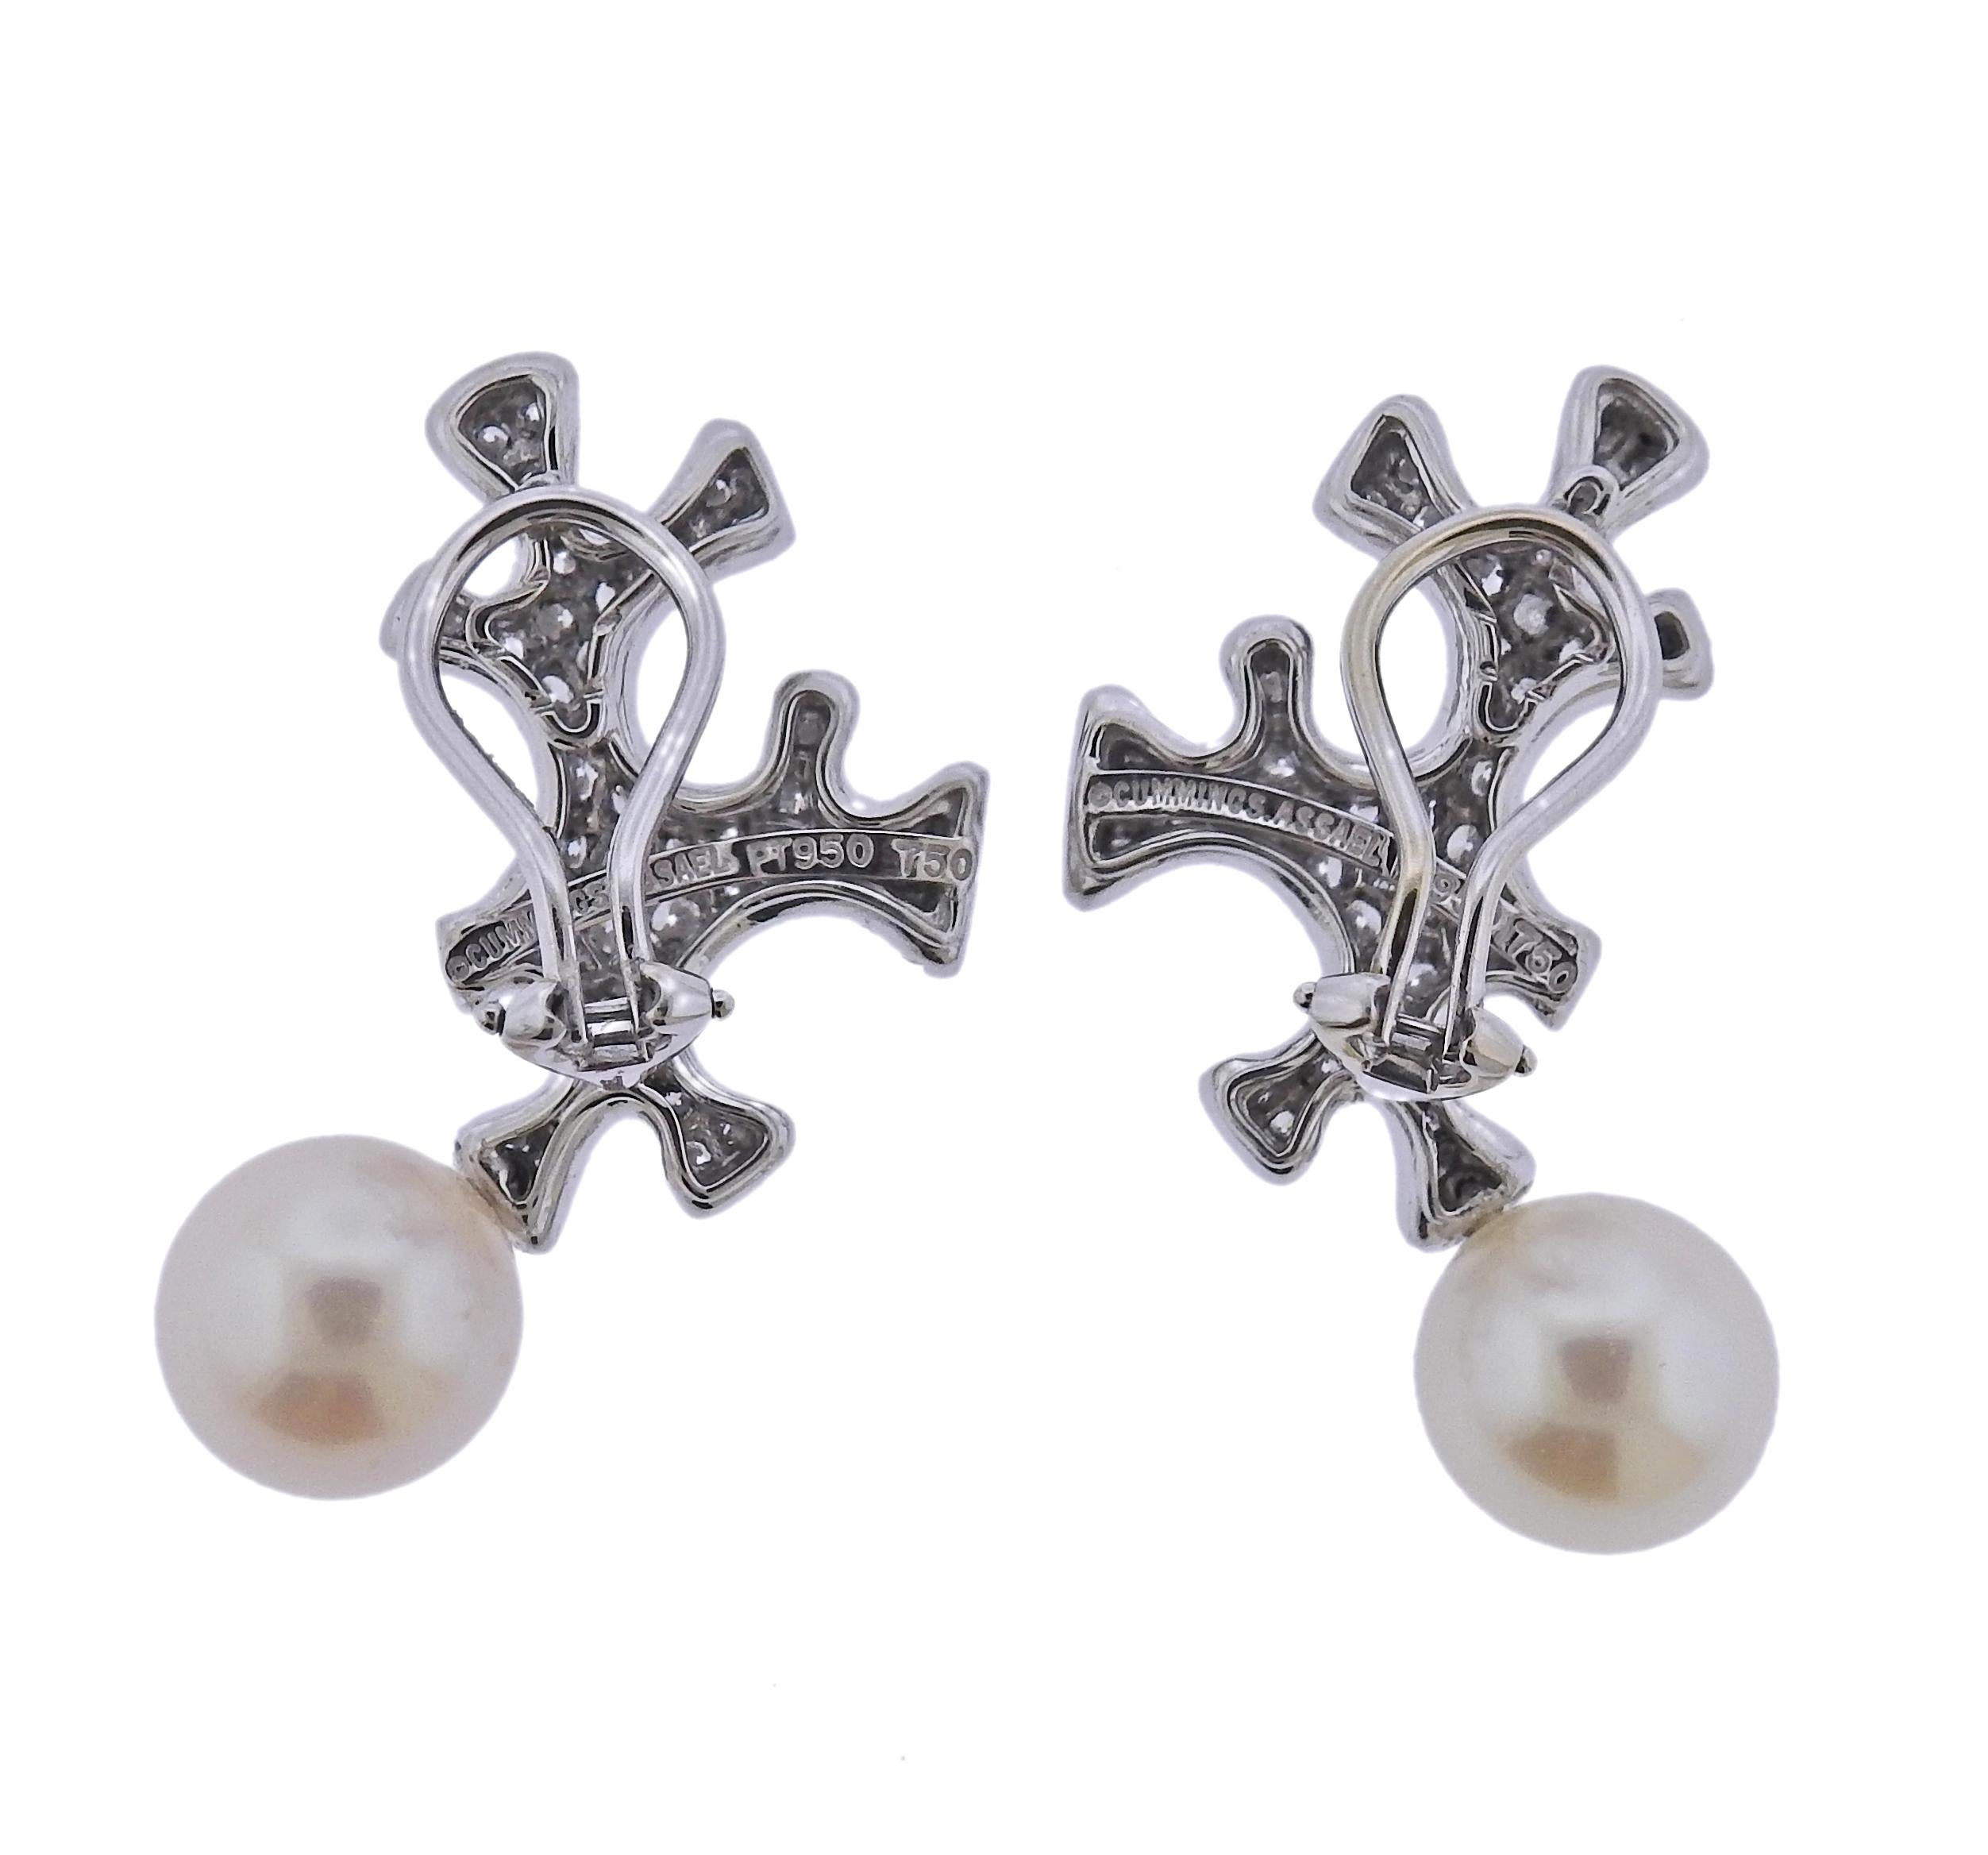 Pair of  18k gold and platinum new without tags earrings by Angela Cummings and Assael, with 10.5mm - 11mm pearls and 2.50ctw in G/VS diamonds.  Retail $22800. Come with pouch.  Earrings measure approx. 35mm x 15mm. Weight - 15.6 grams. Marked: